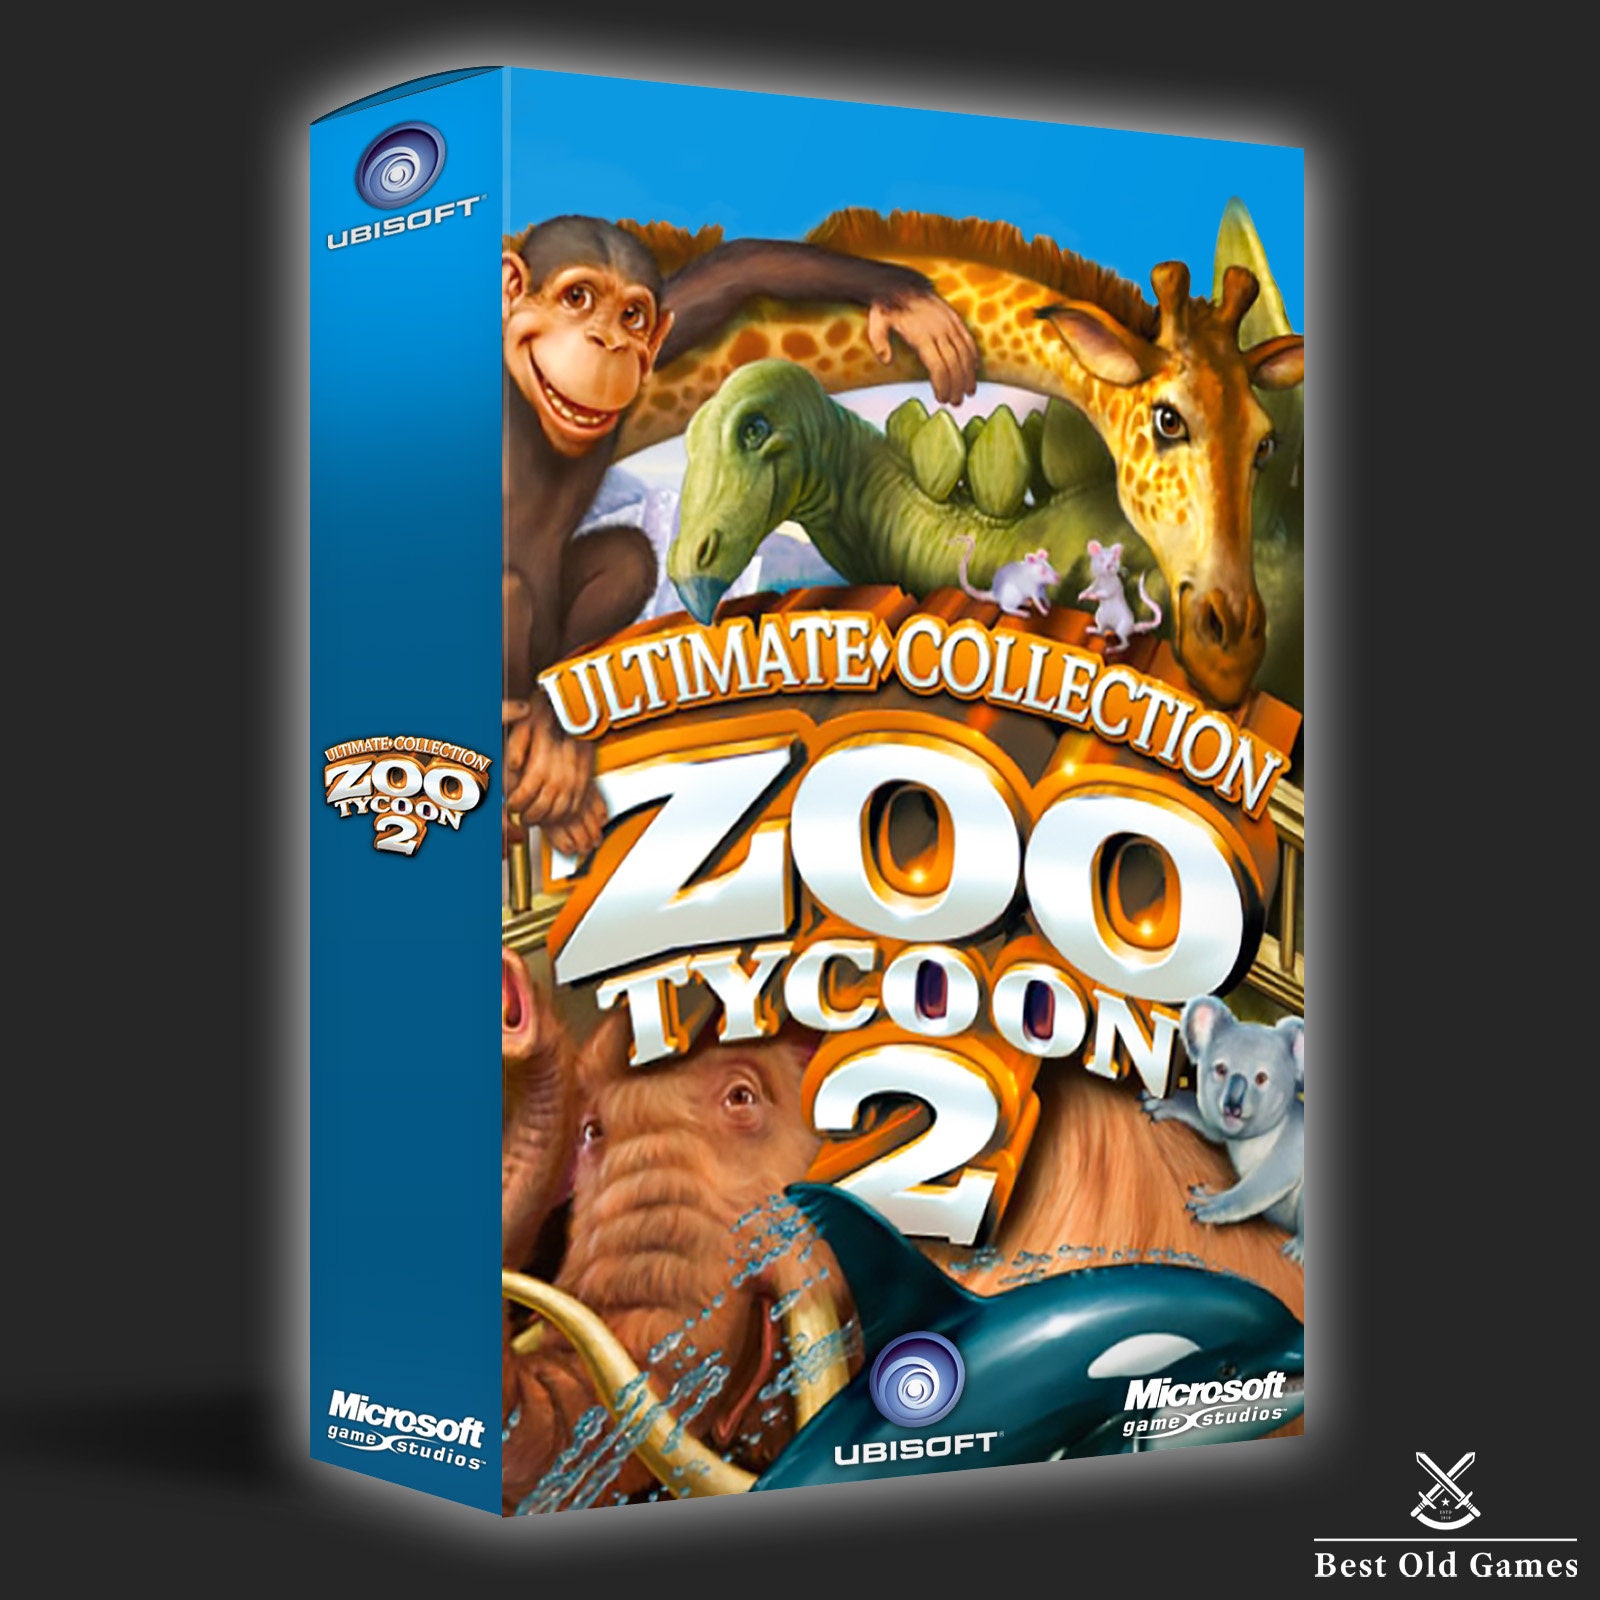 ZOO TYCOON 2 - ZOOKEEPER COLLECTION : Video  